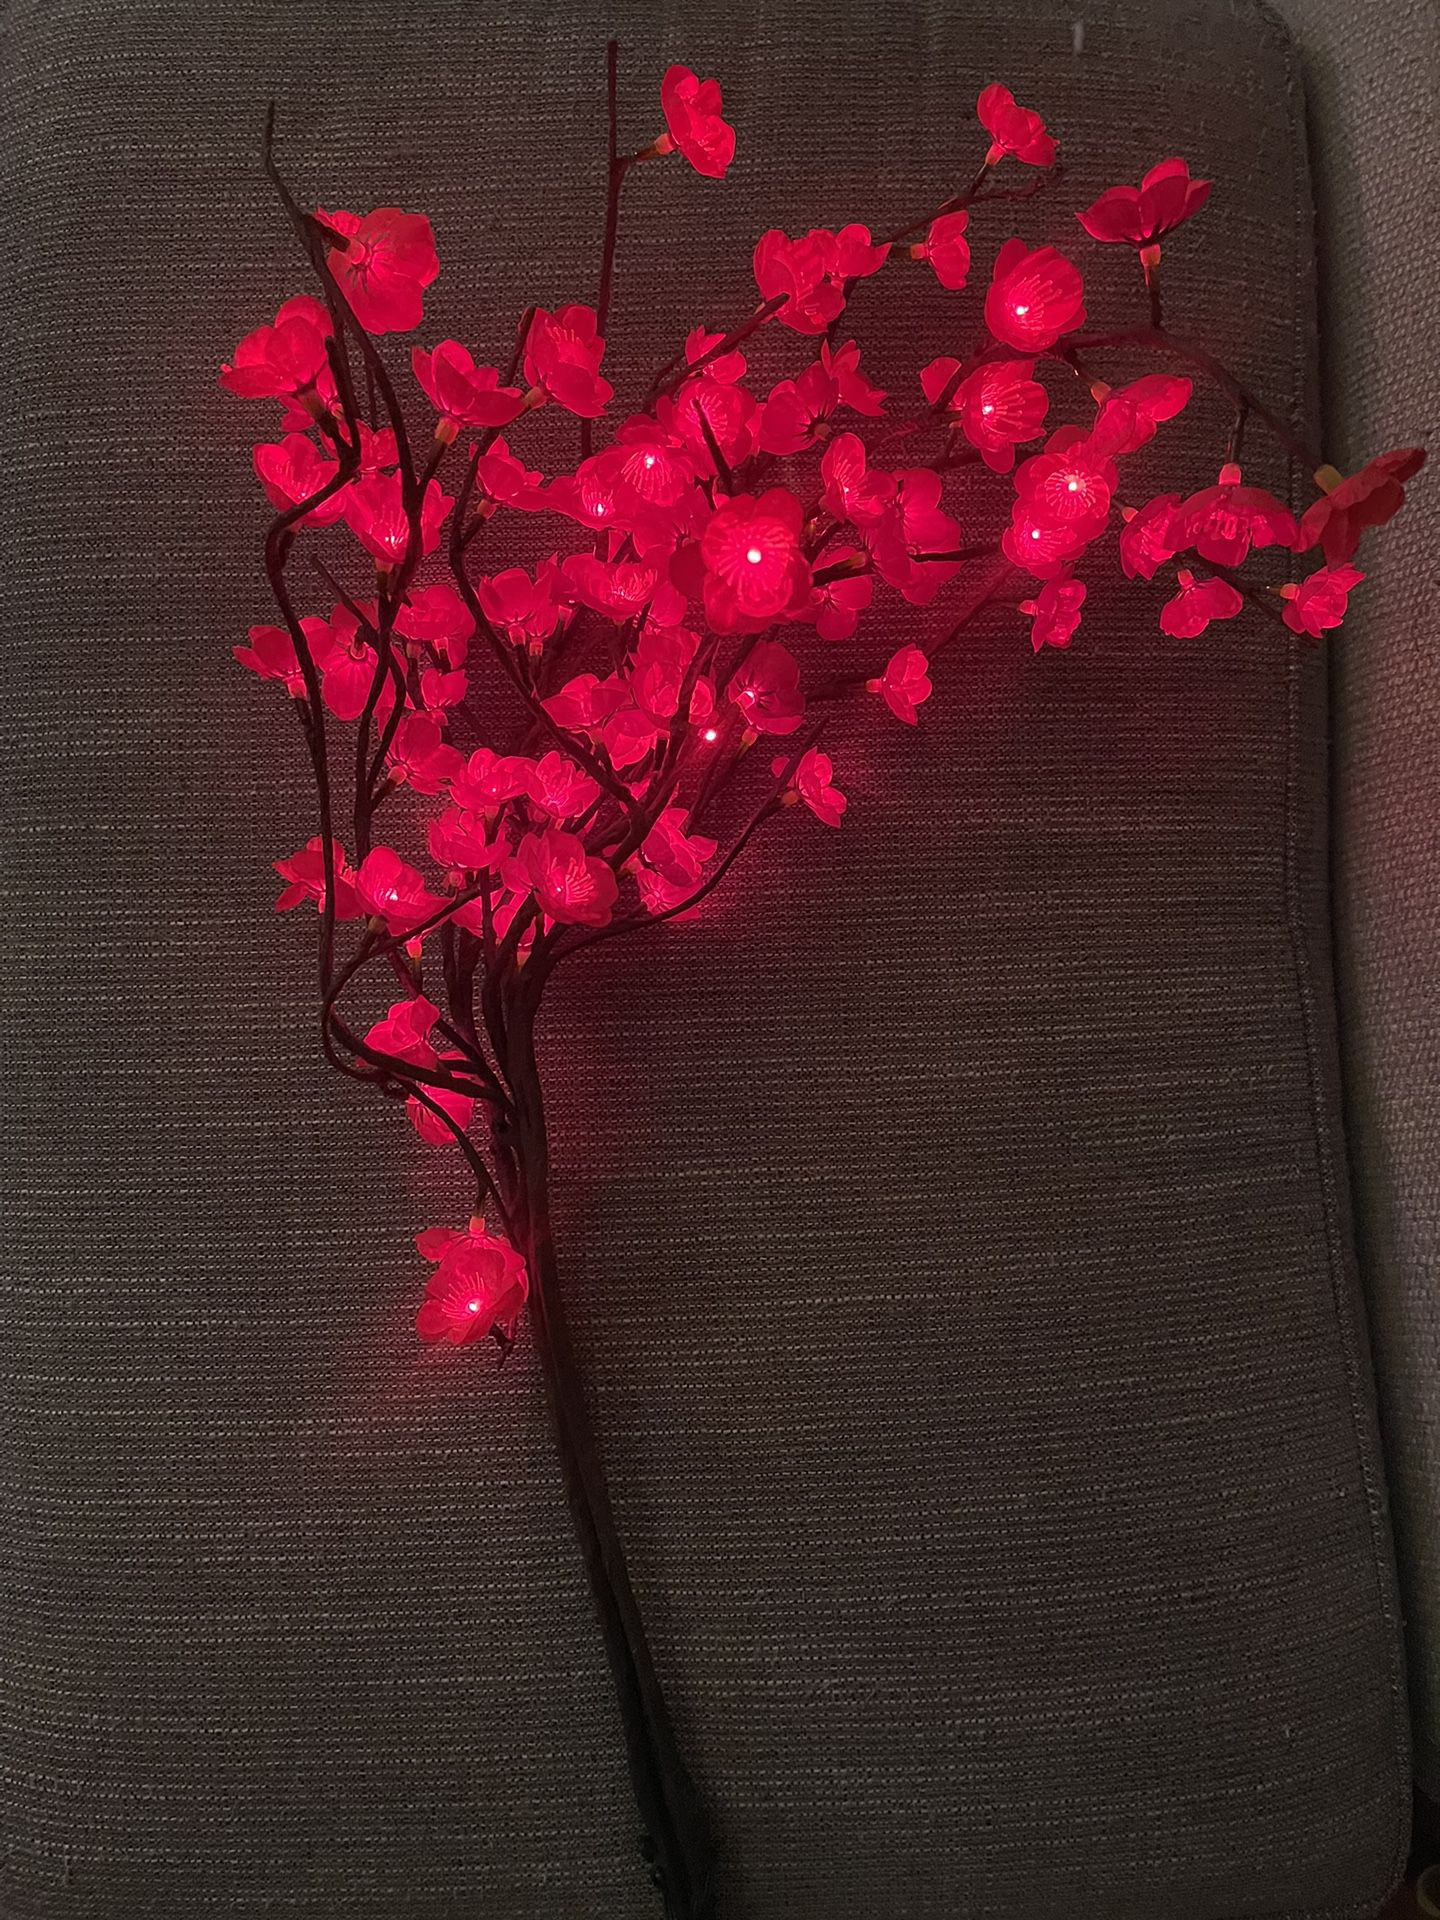 Red Light Up Decorative Flowers